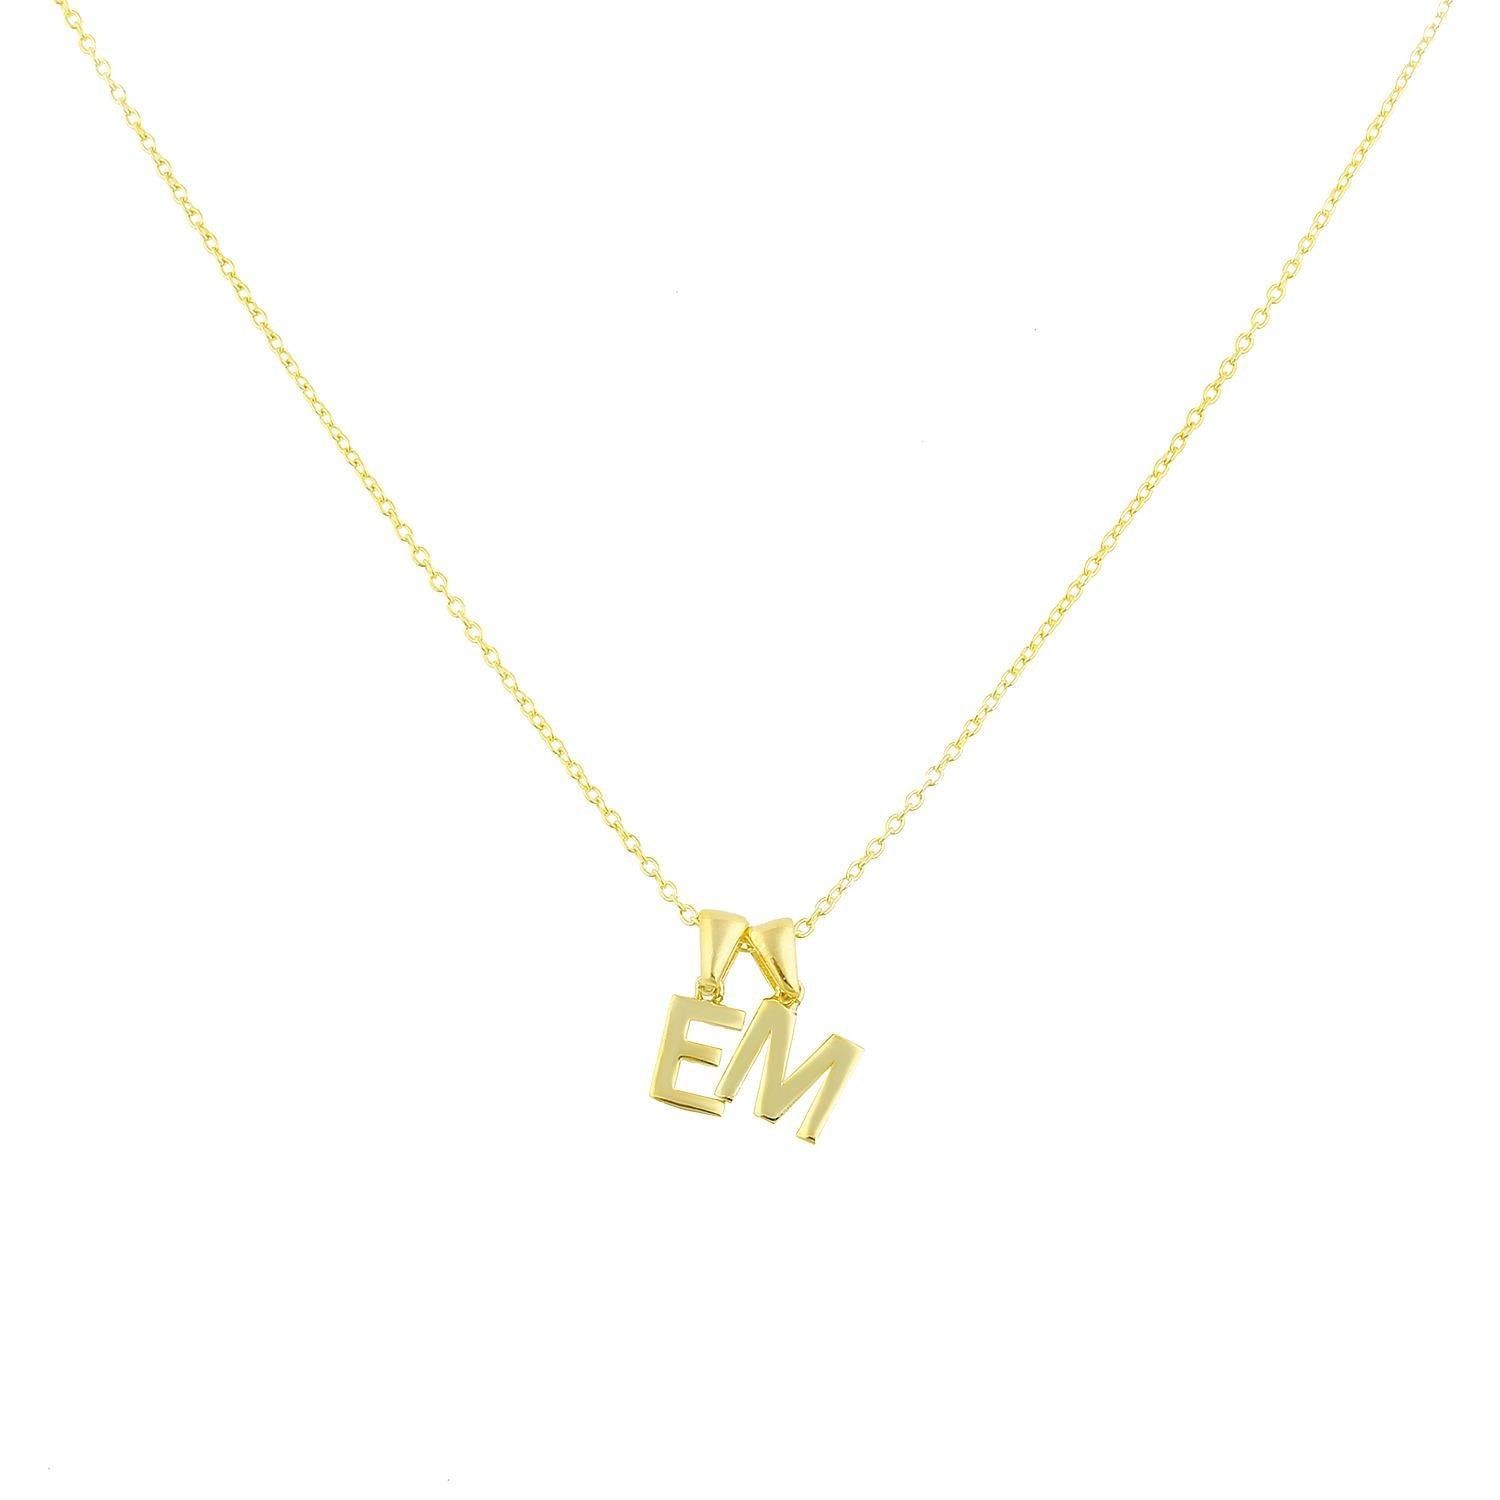 Custom Layered Initial Necklace JEWELRY The Sis Kiss Two Initials Gold No Crystals